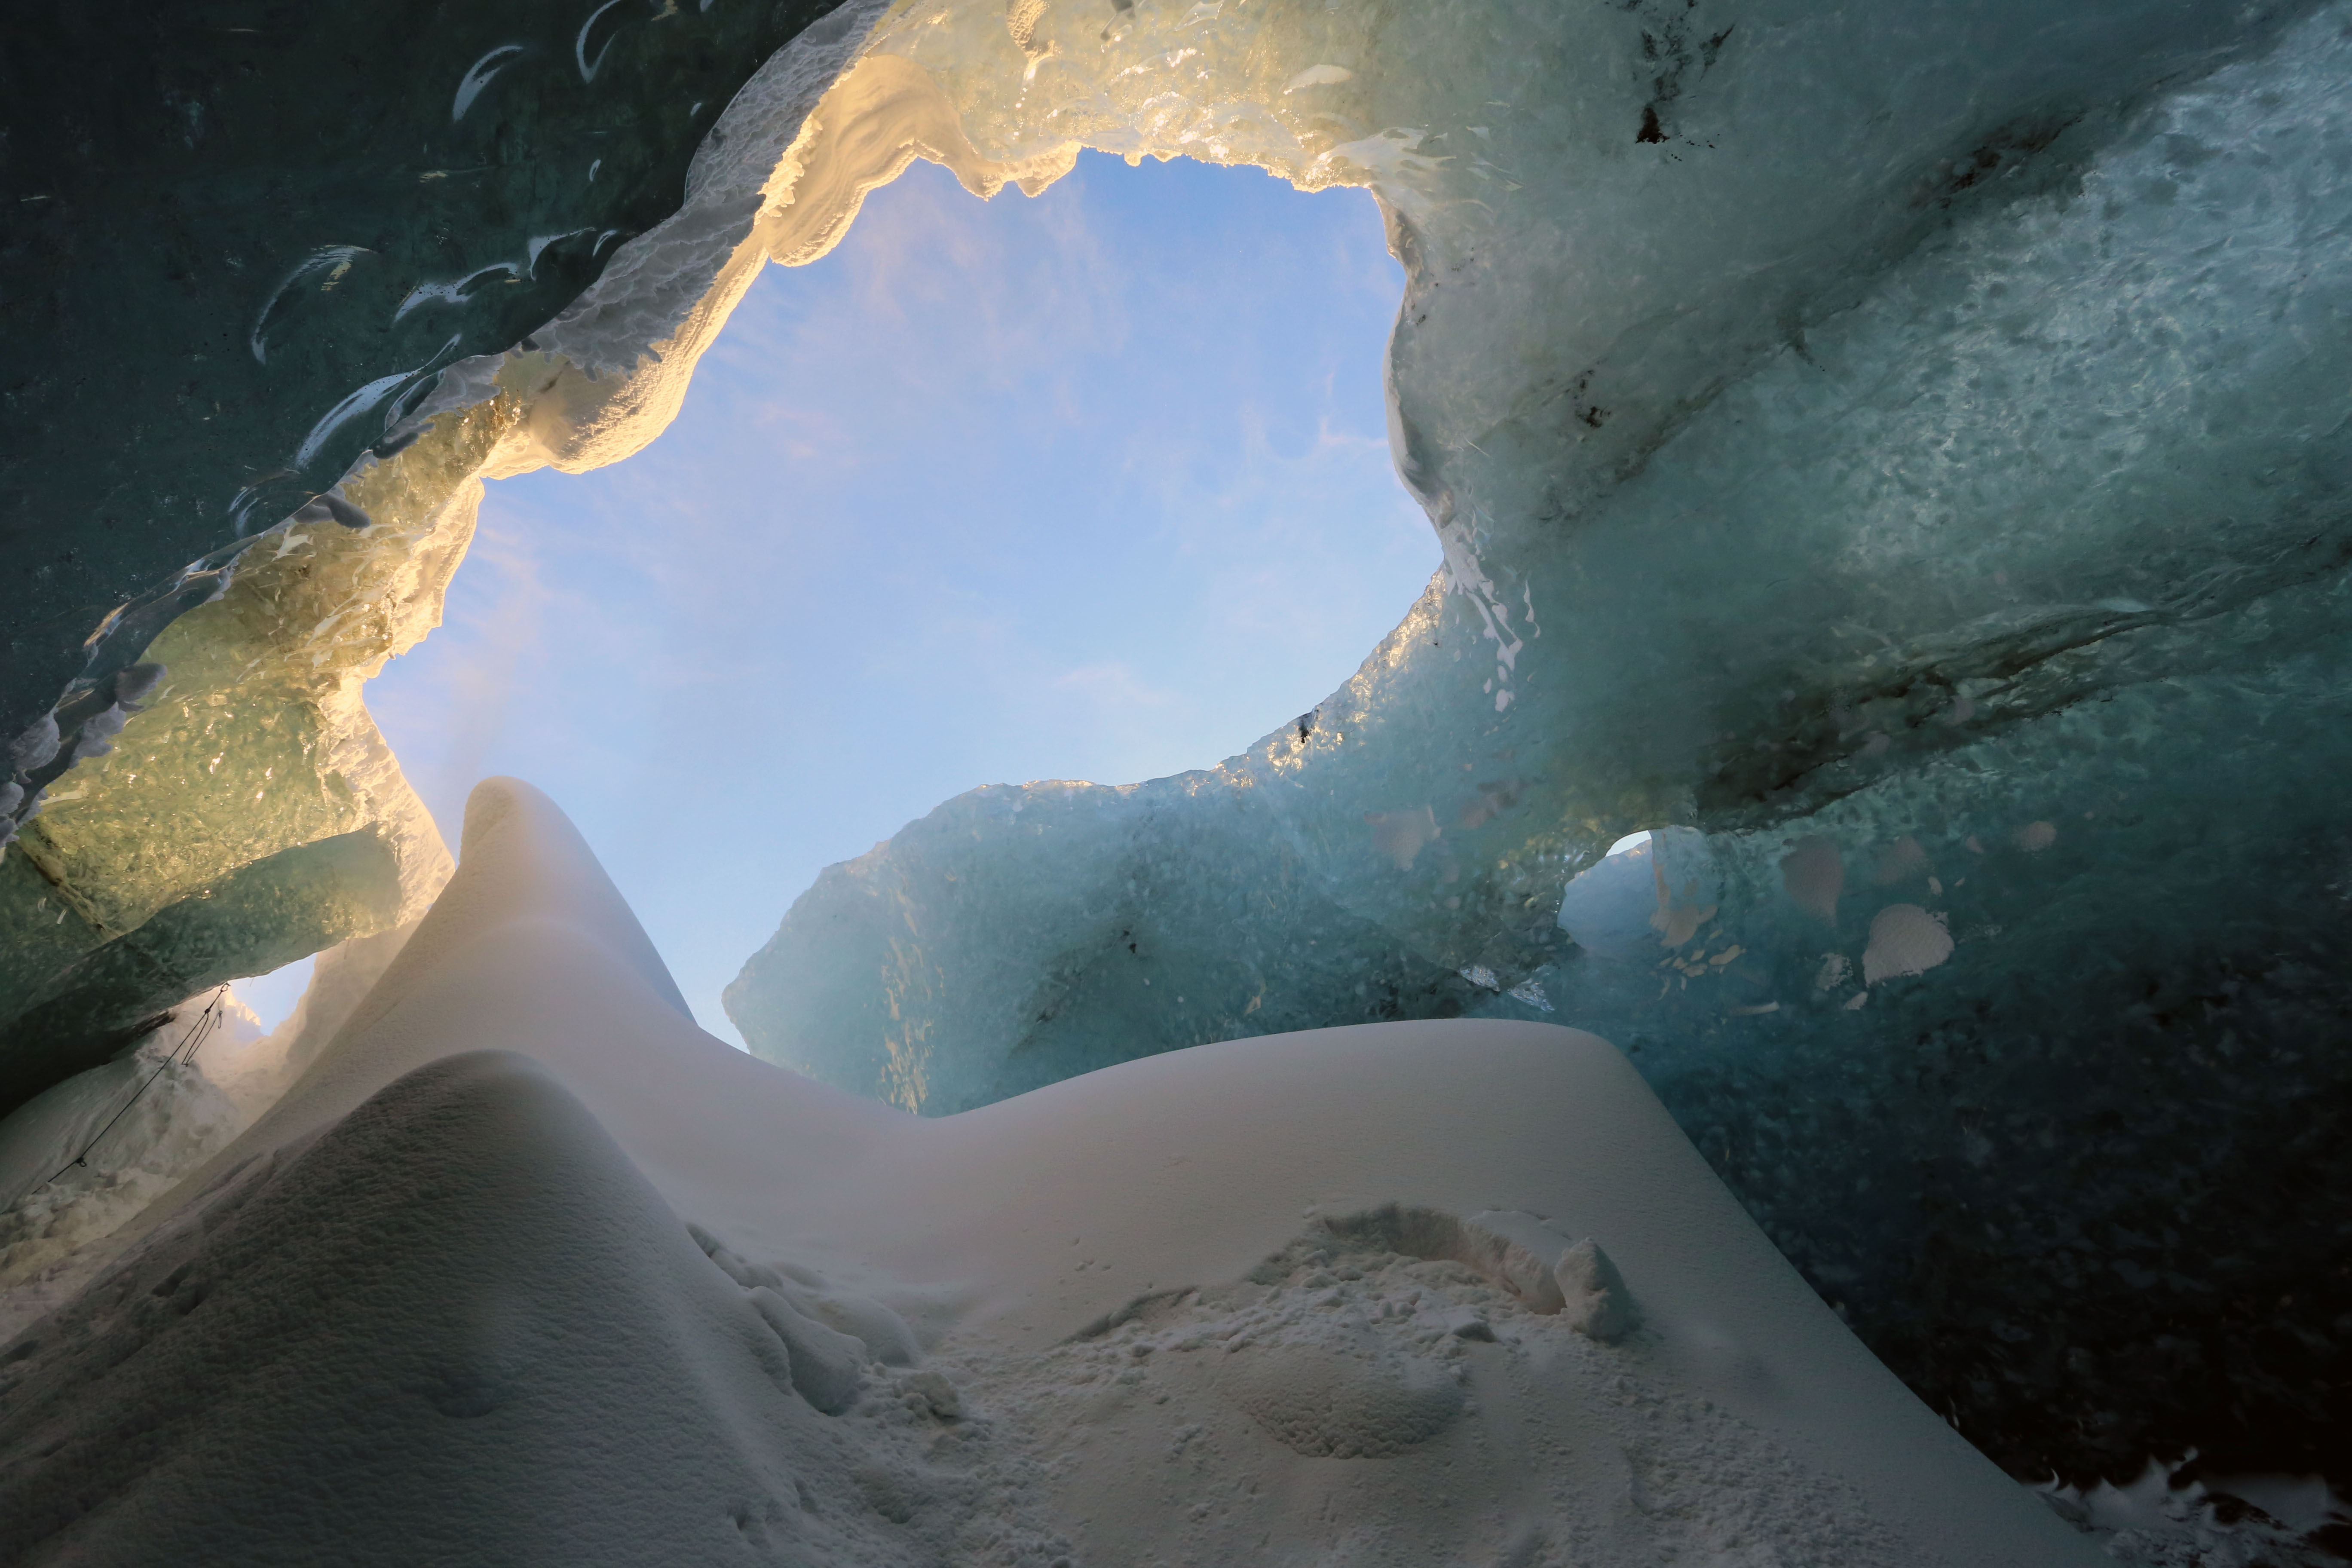 View through the entrance to the Ice Caves